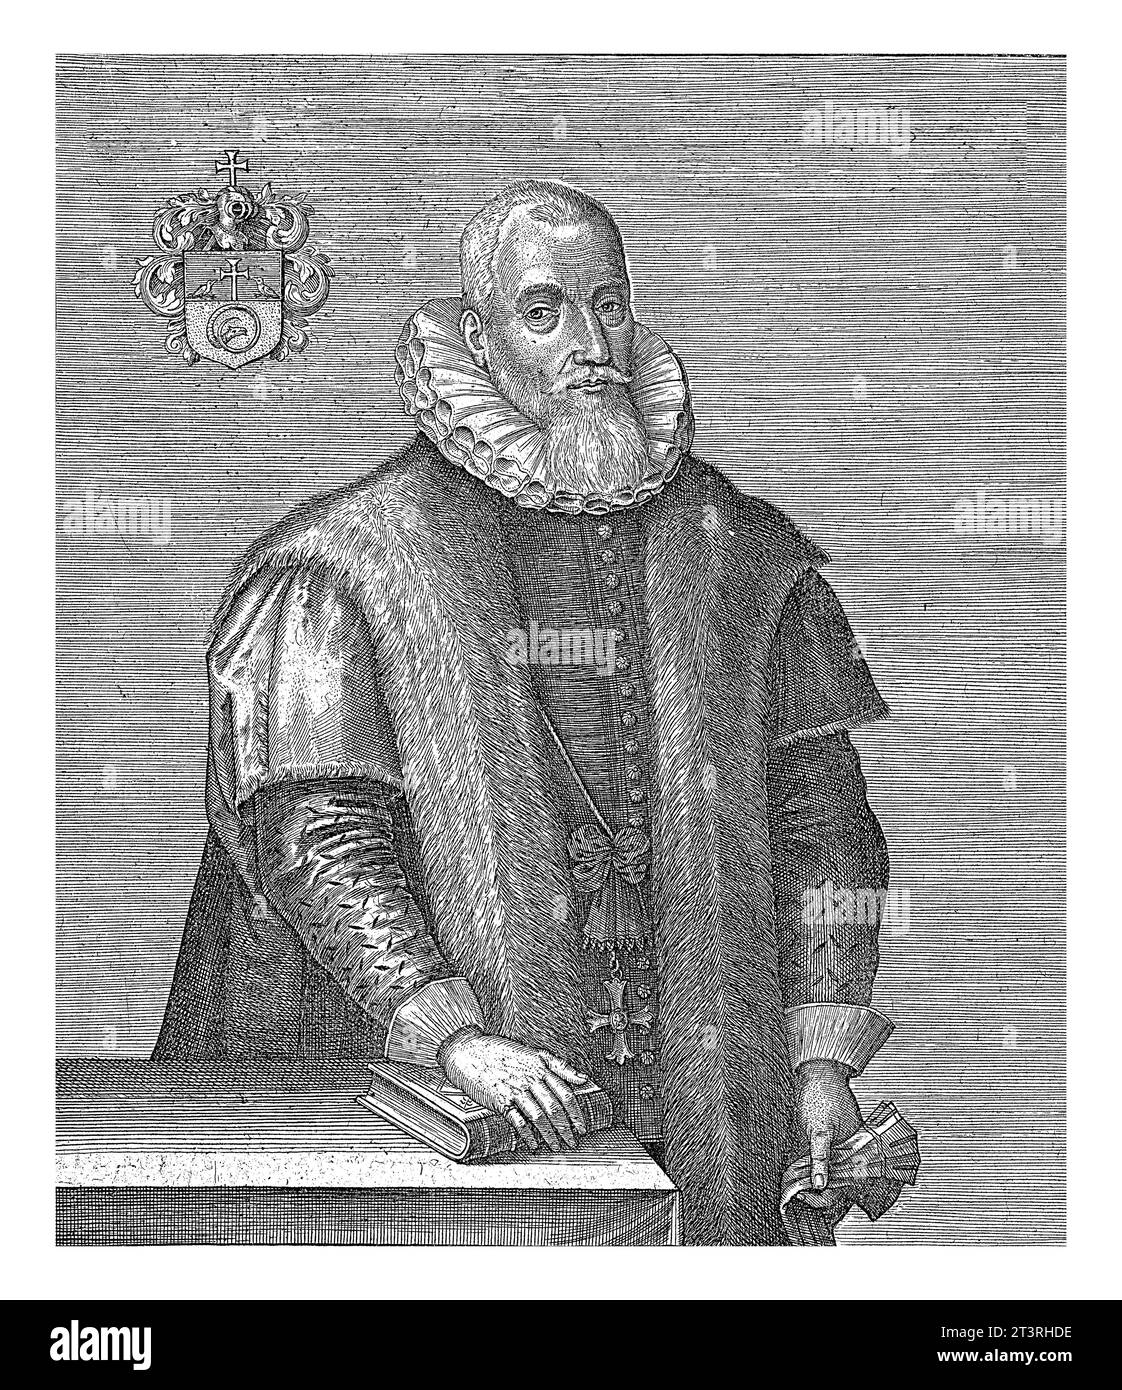 Portrait of Andreas Hoyus at the age of 78, Martin Baes, in or after 1629 Page from a book with a portrait of the professor of classics Andreas Hoyus. Stock Photo